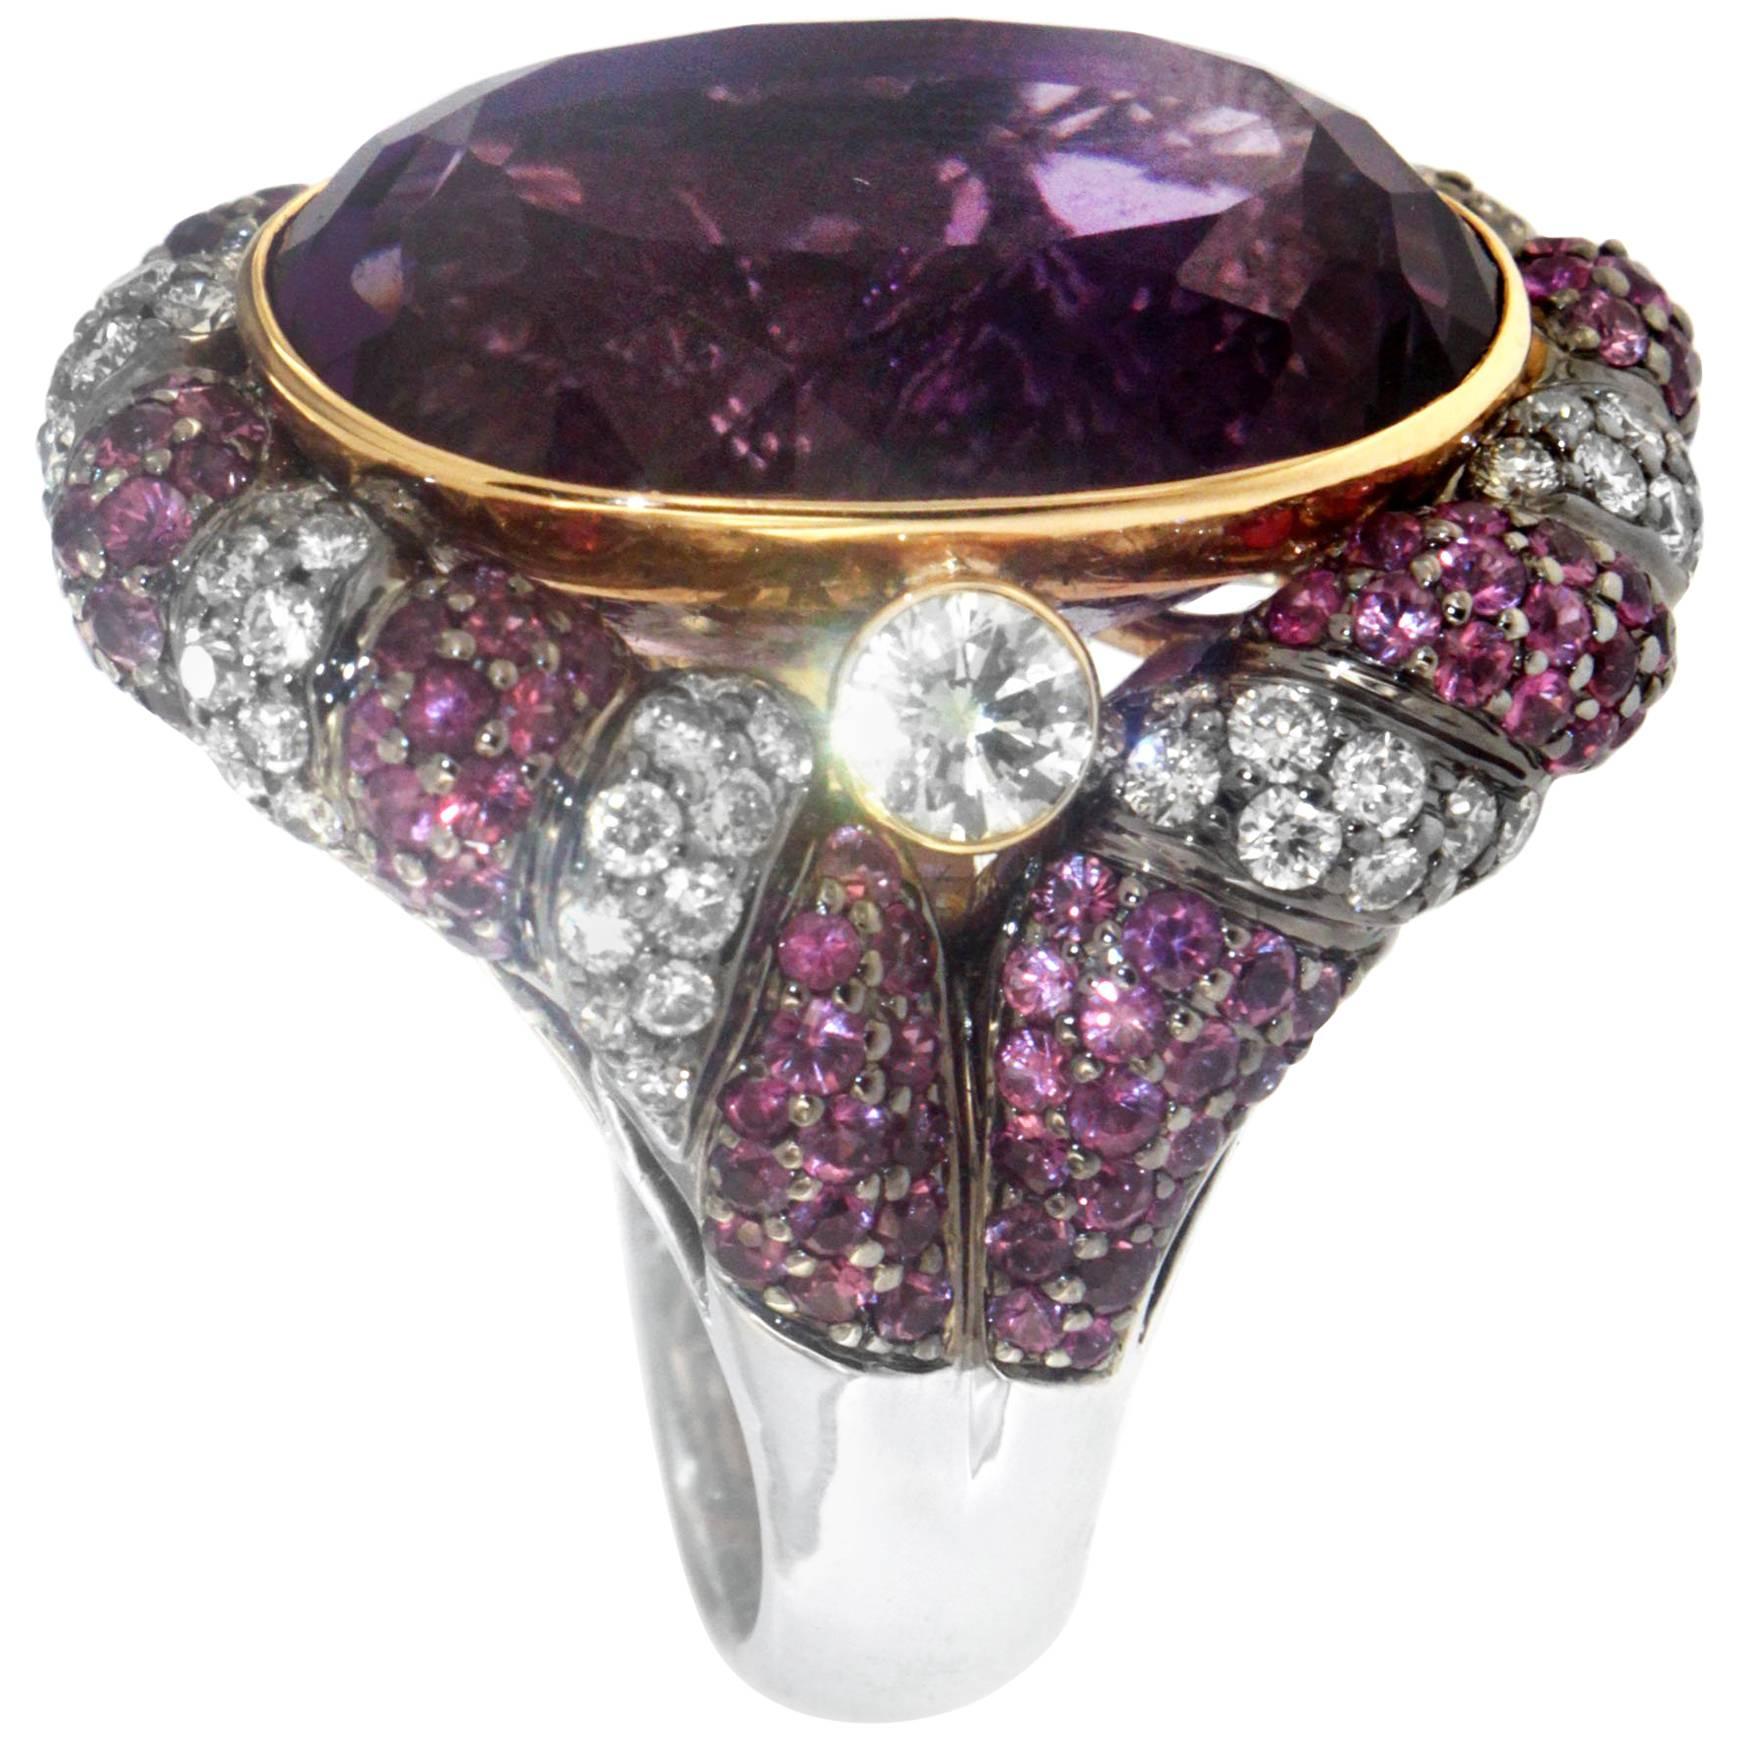 Zorab Creation 19.89 Carat Amethyst Pink Sapphire Diamond Cocktail Ring For Sale